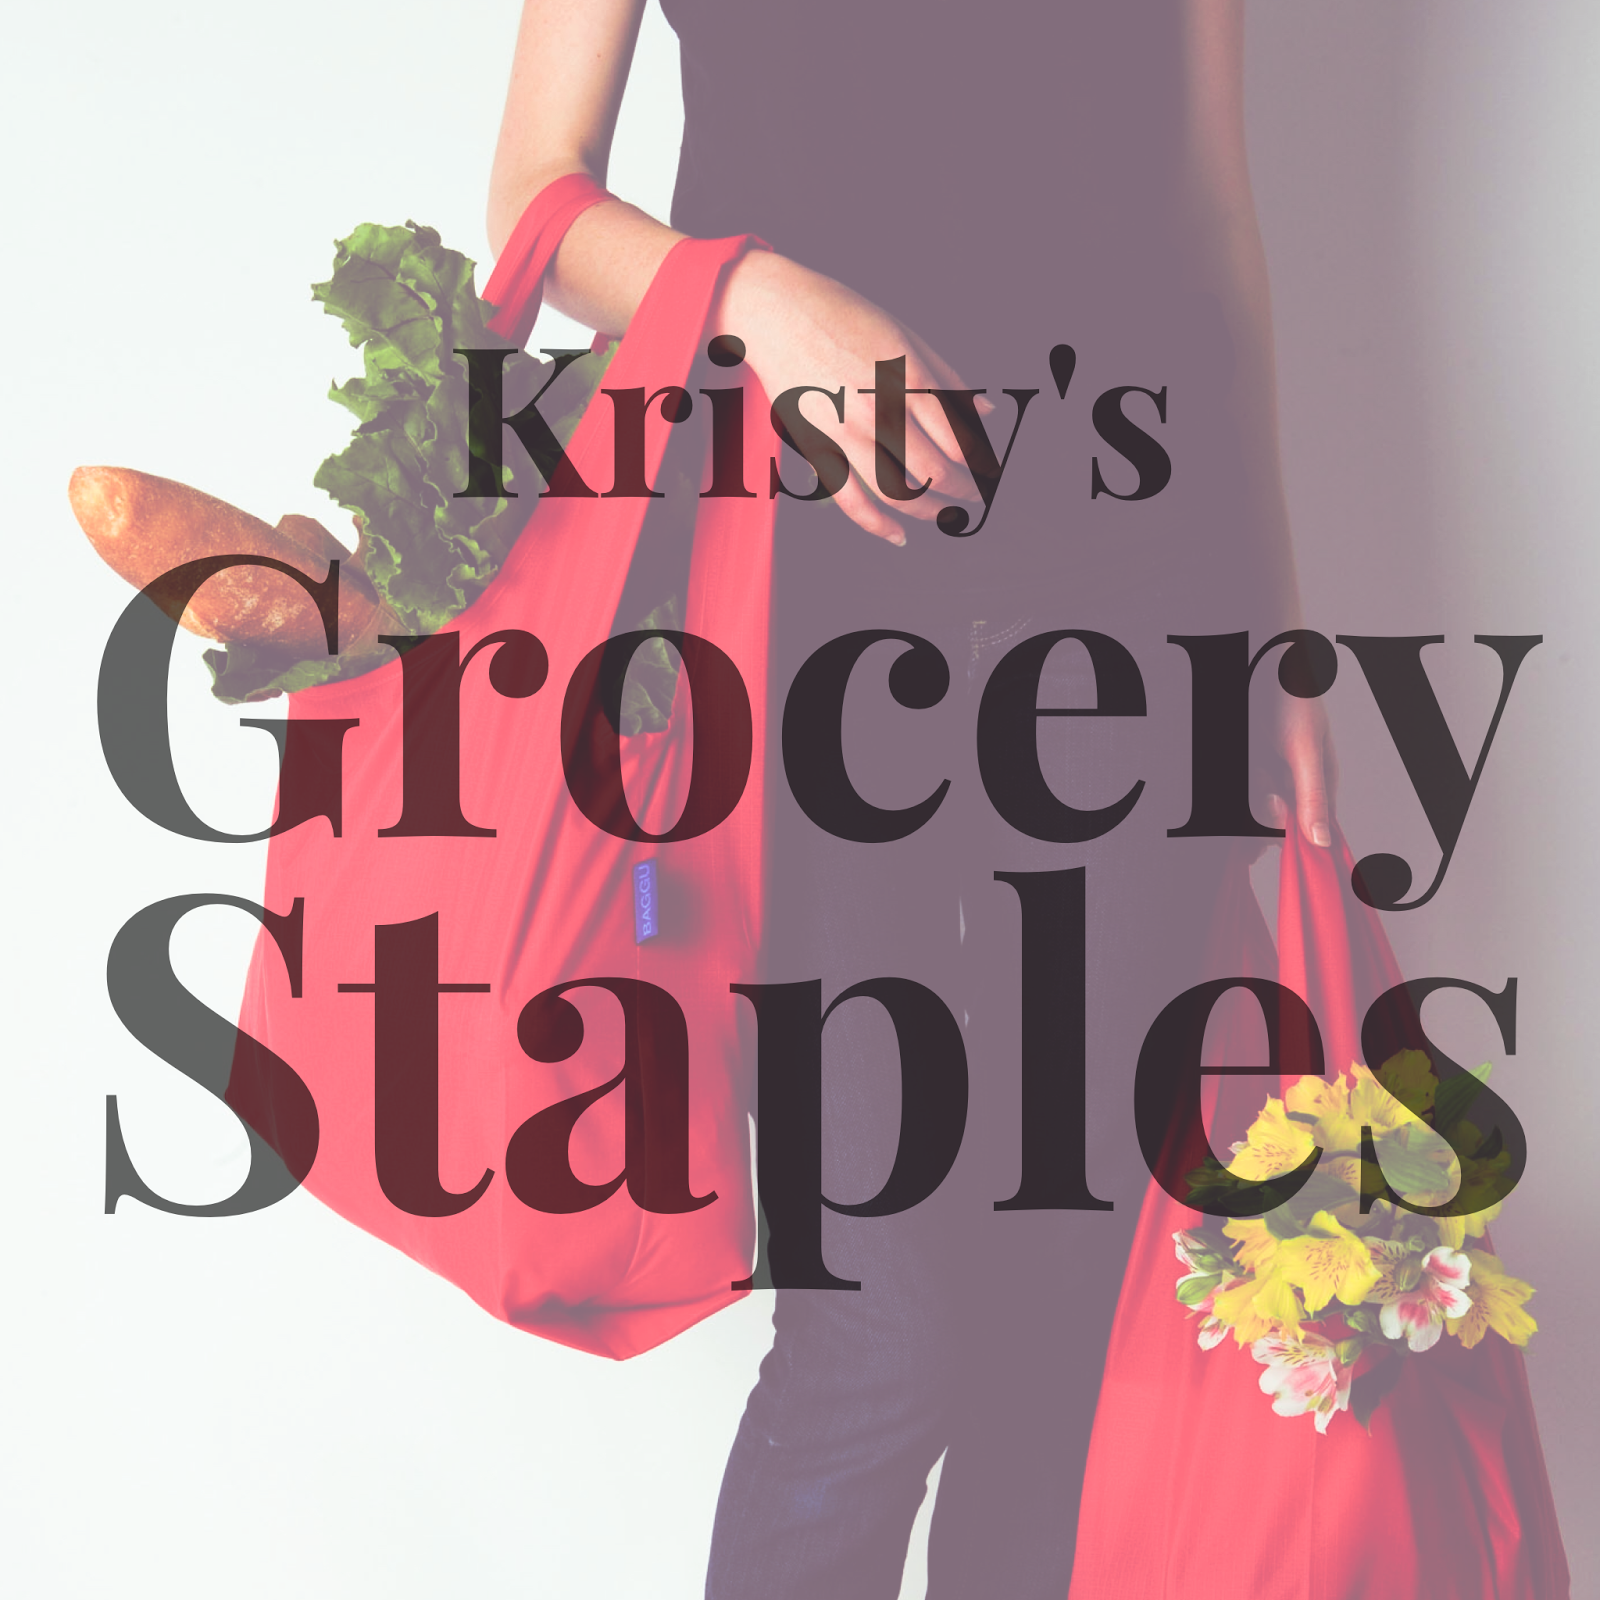 Get Kristy's Grocery Staples FREE!!